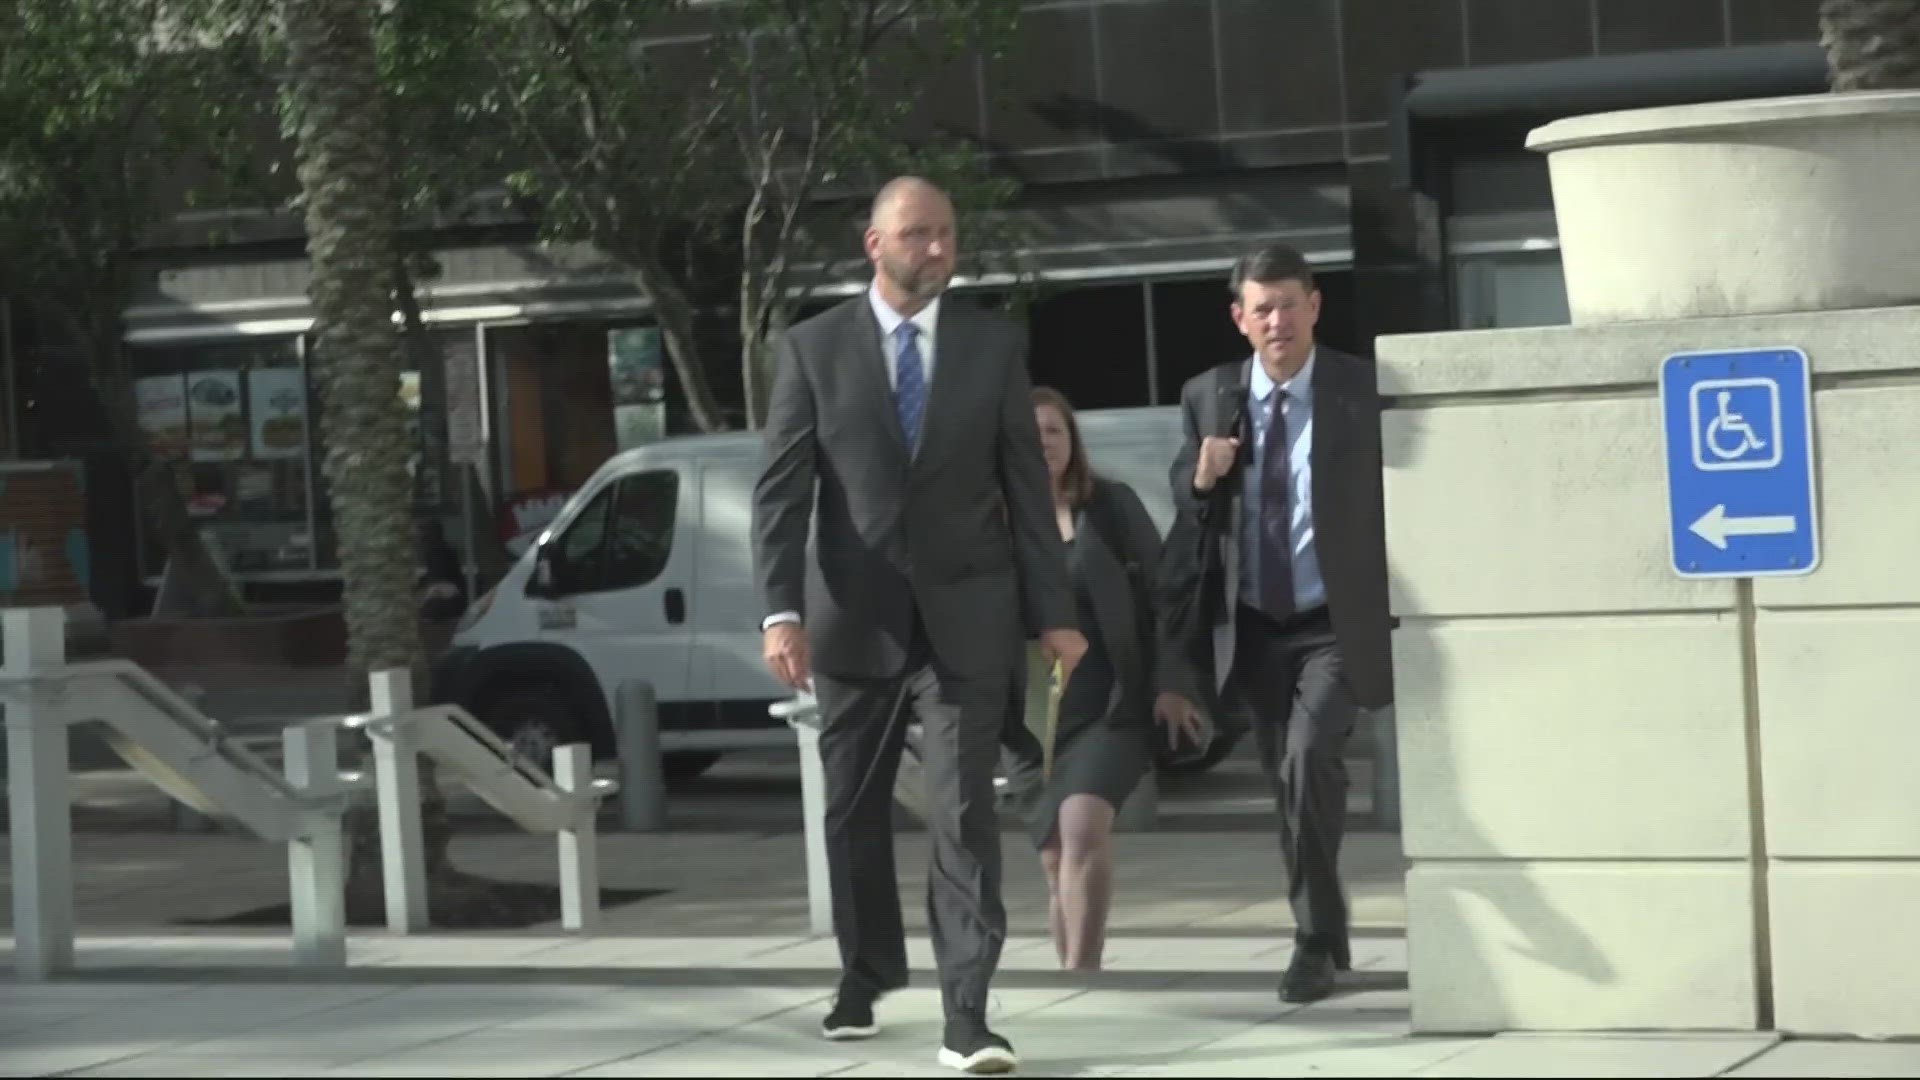 Ousted JEA CEO Aaron Zahn and former Chief Financial Officer Ryan Wannemacher were in court for a second day of pretrial hearings.